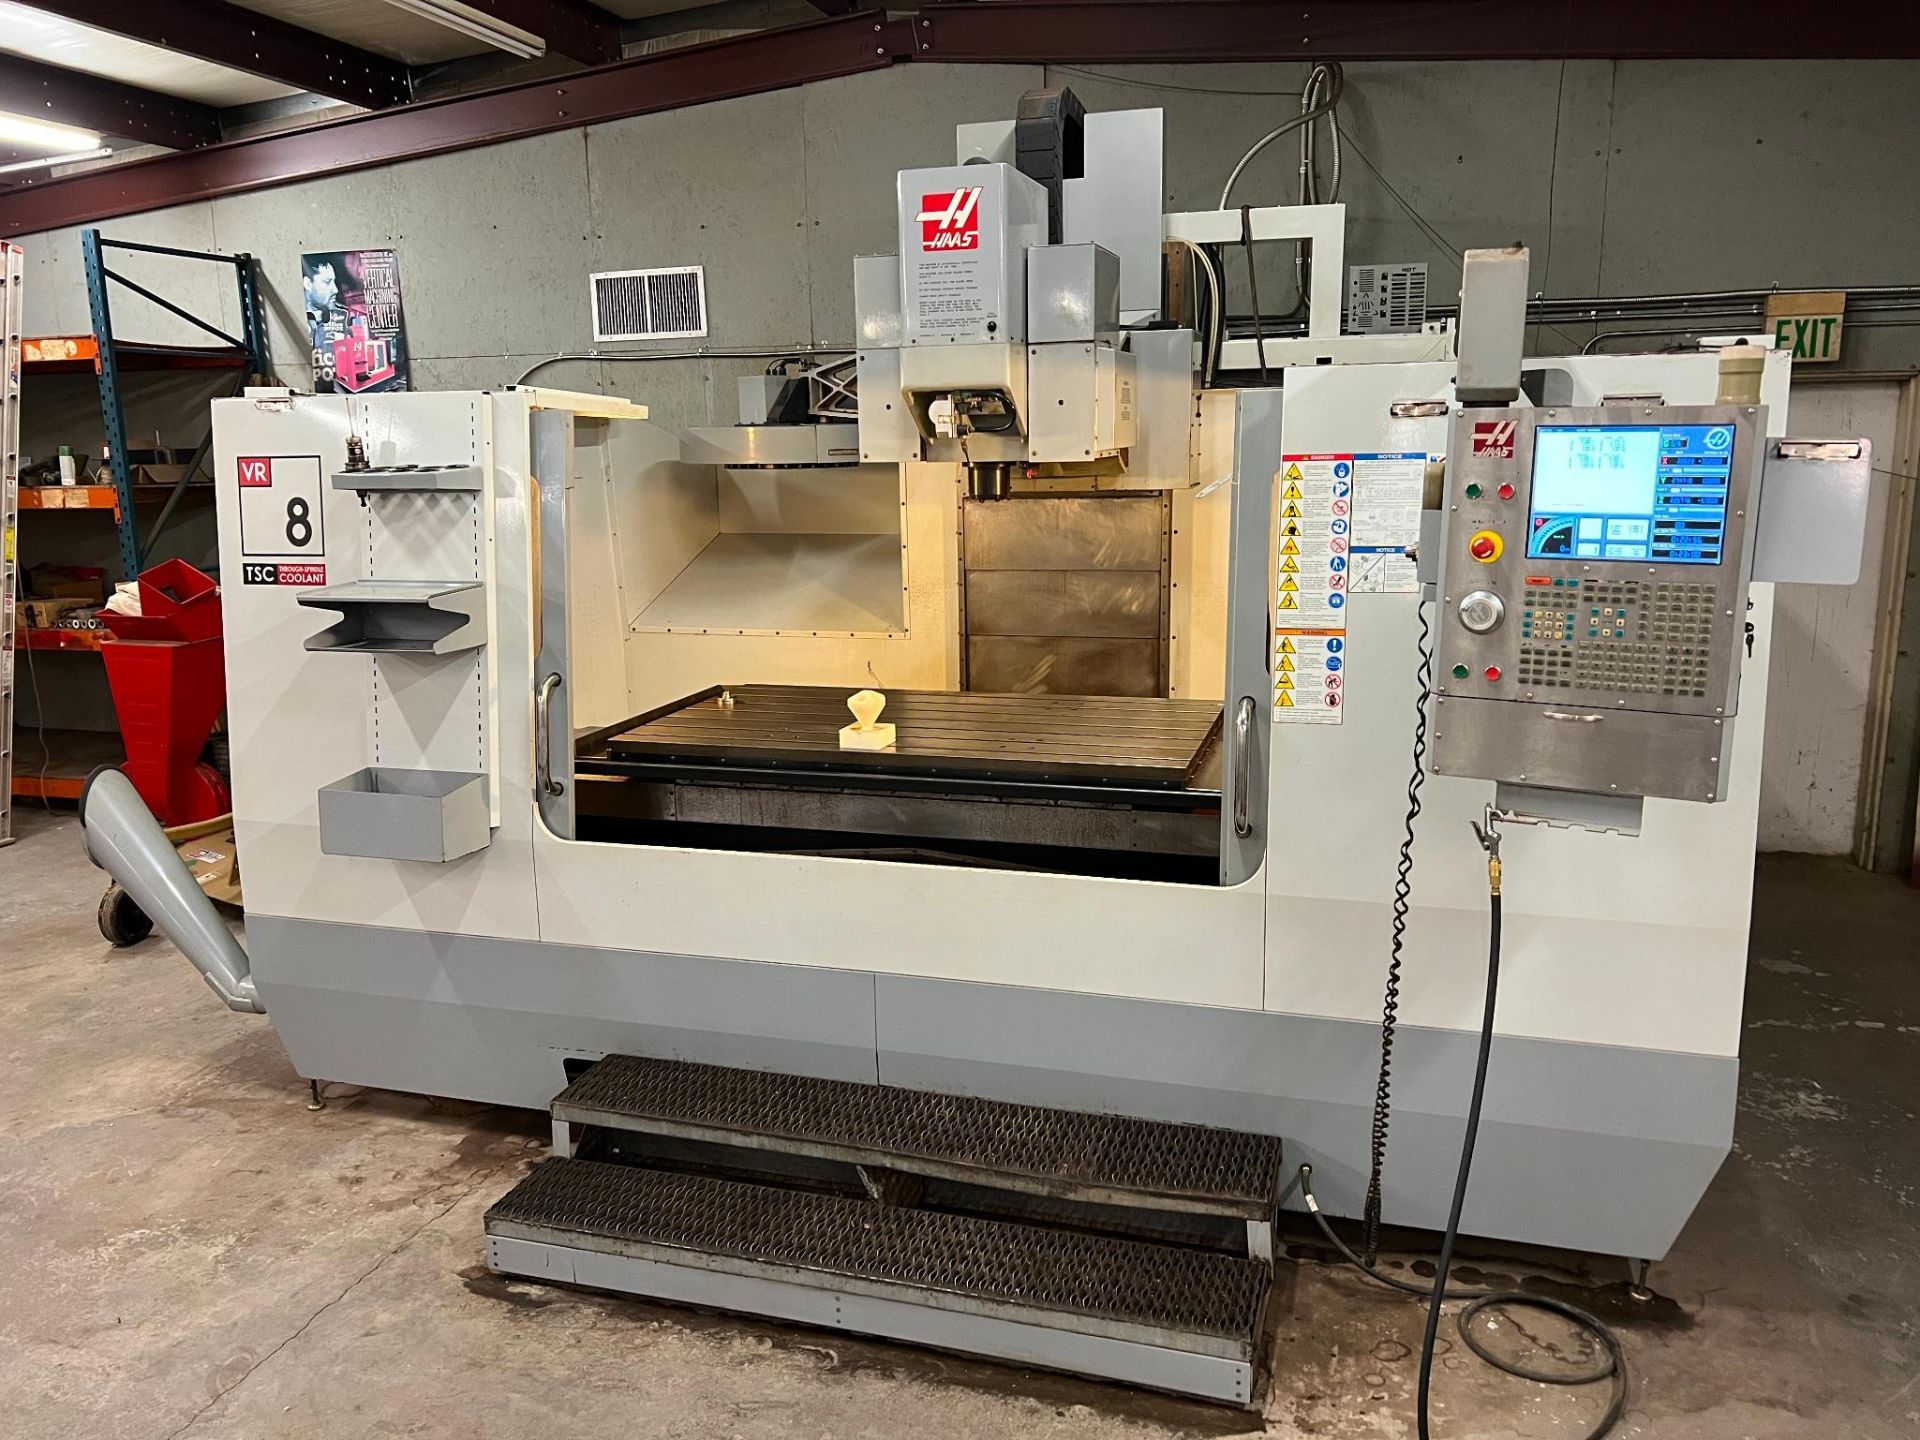 2007 Haas VR-8 5-Axis CNC Vertical Machining Center Serial Number: 1057089 X-Axis Travel: 64" Y-Axis - Image 5 of 37